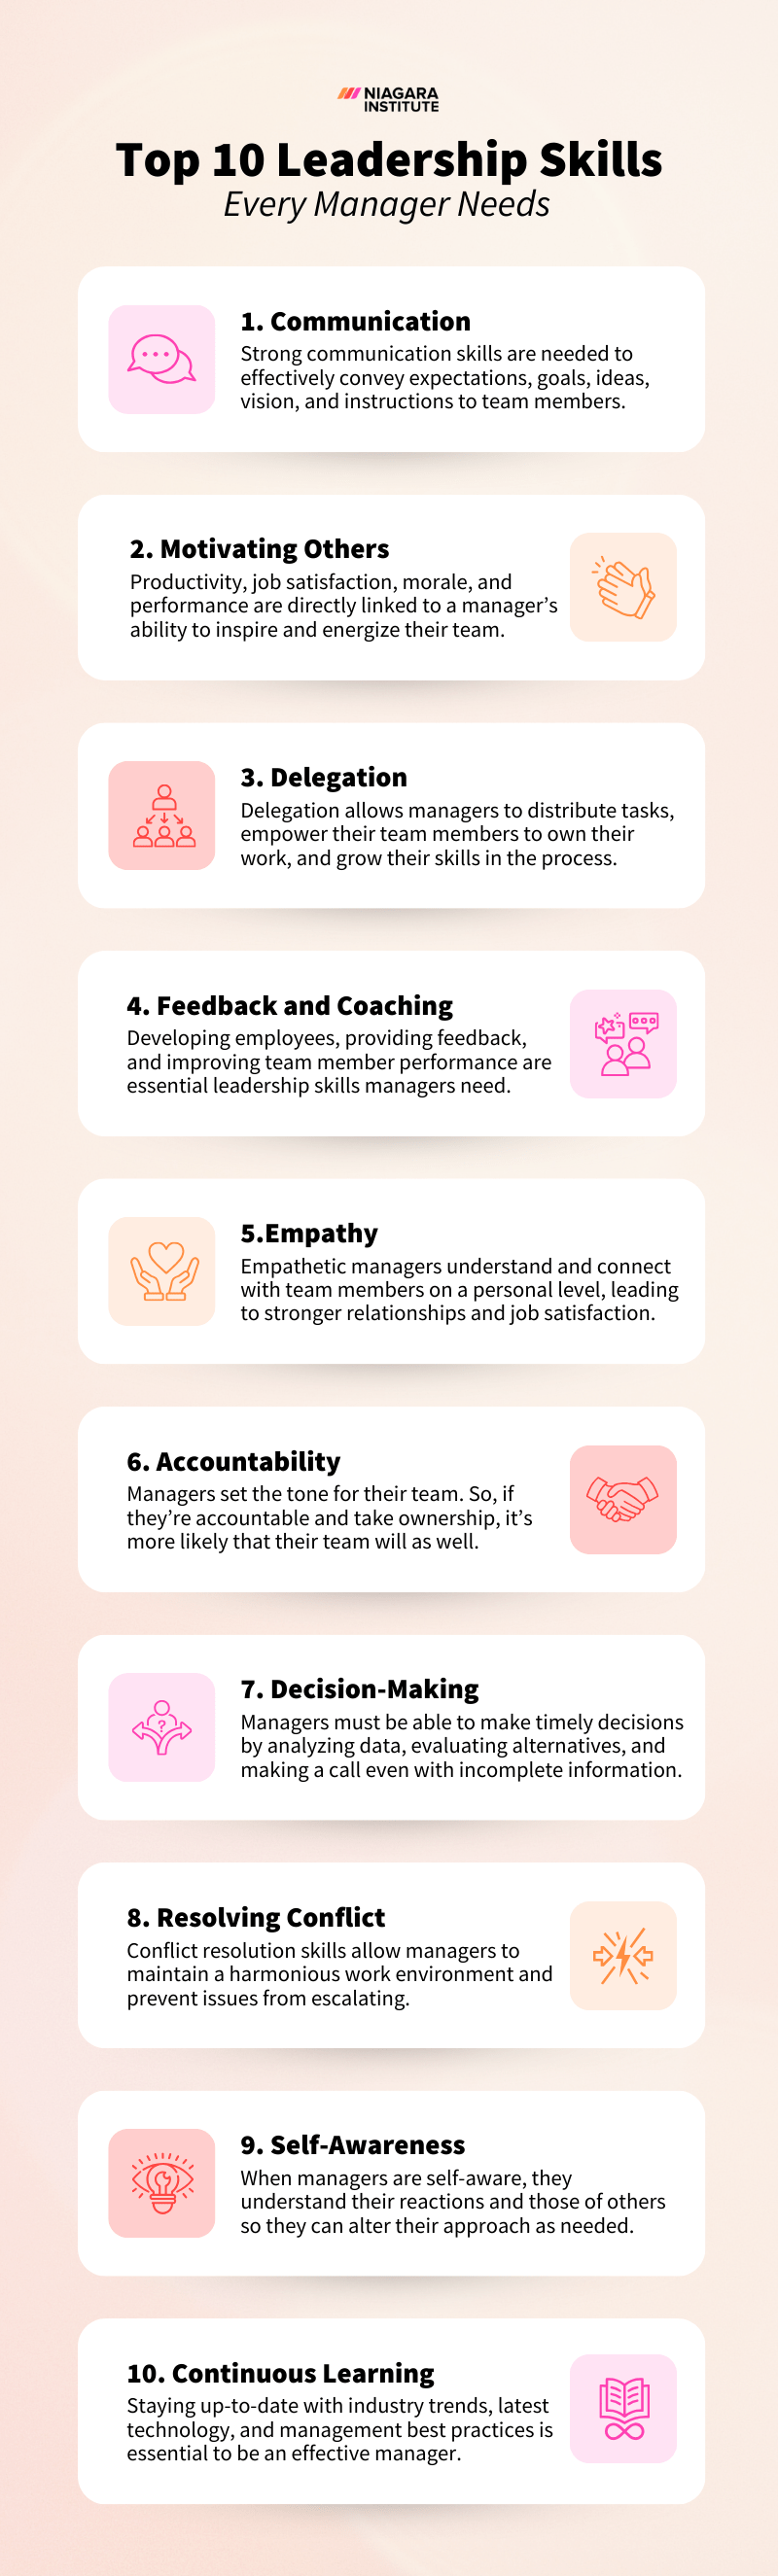 Top 10 Leadership Skills for Managers-1